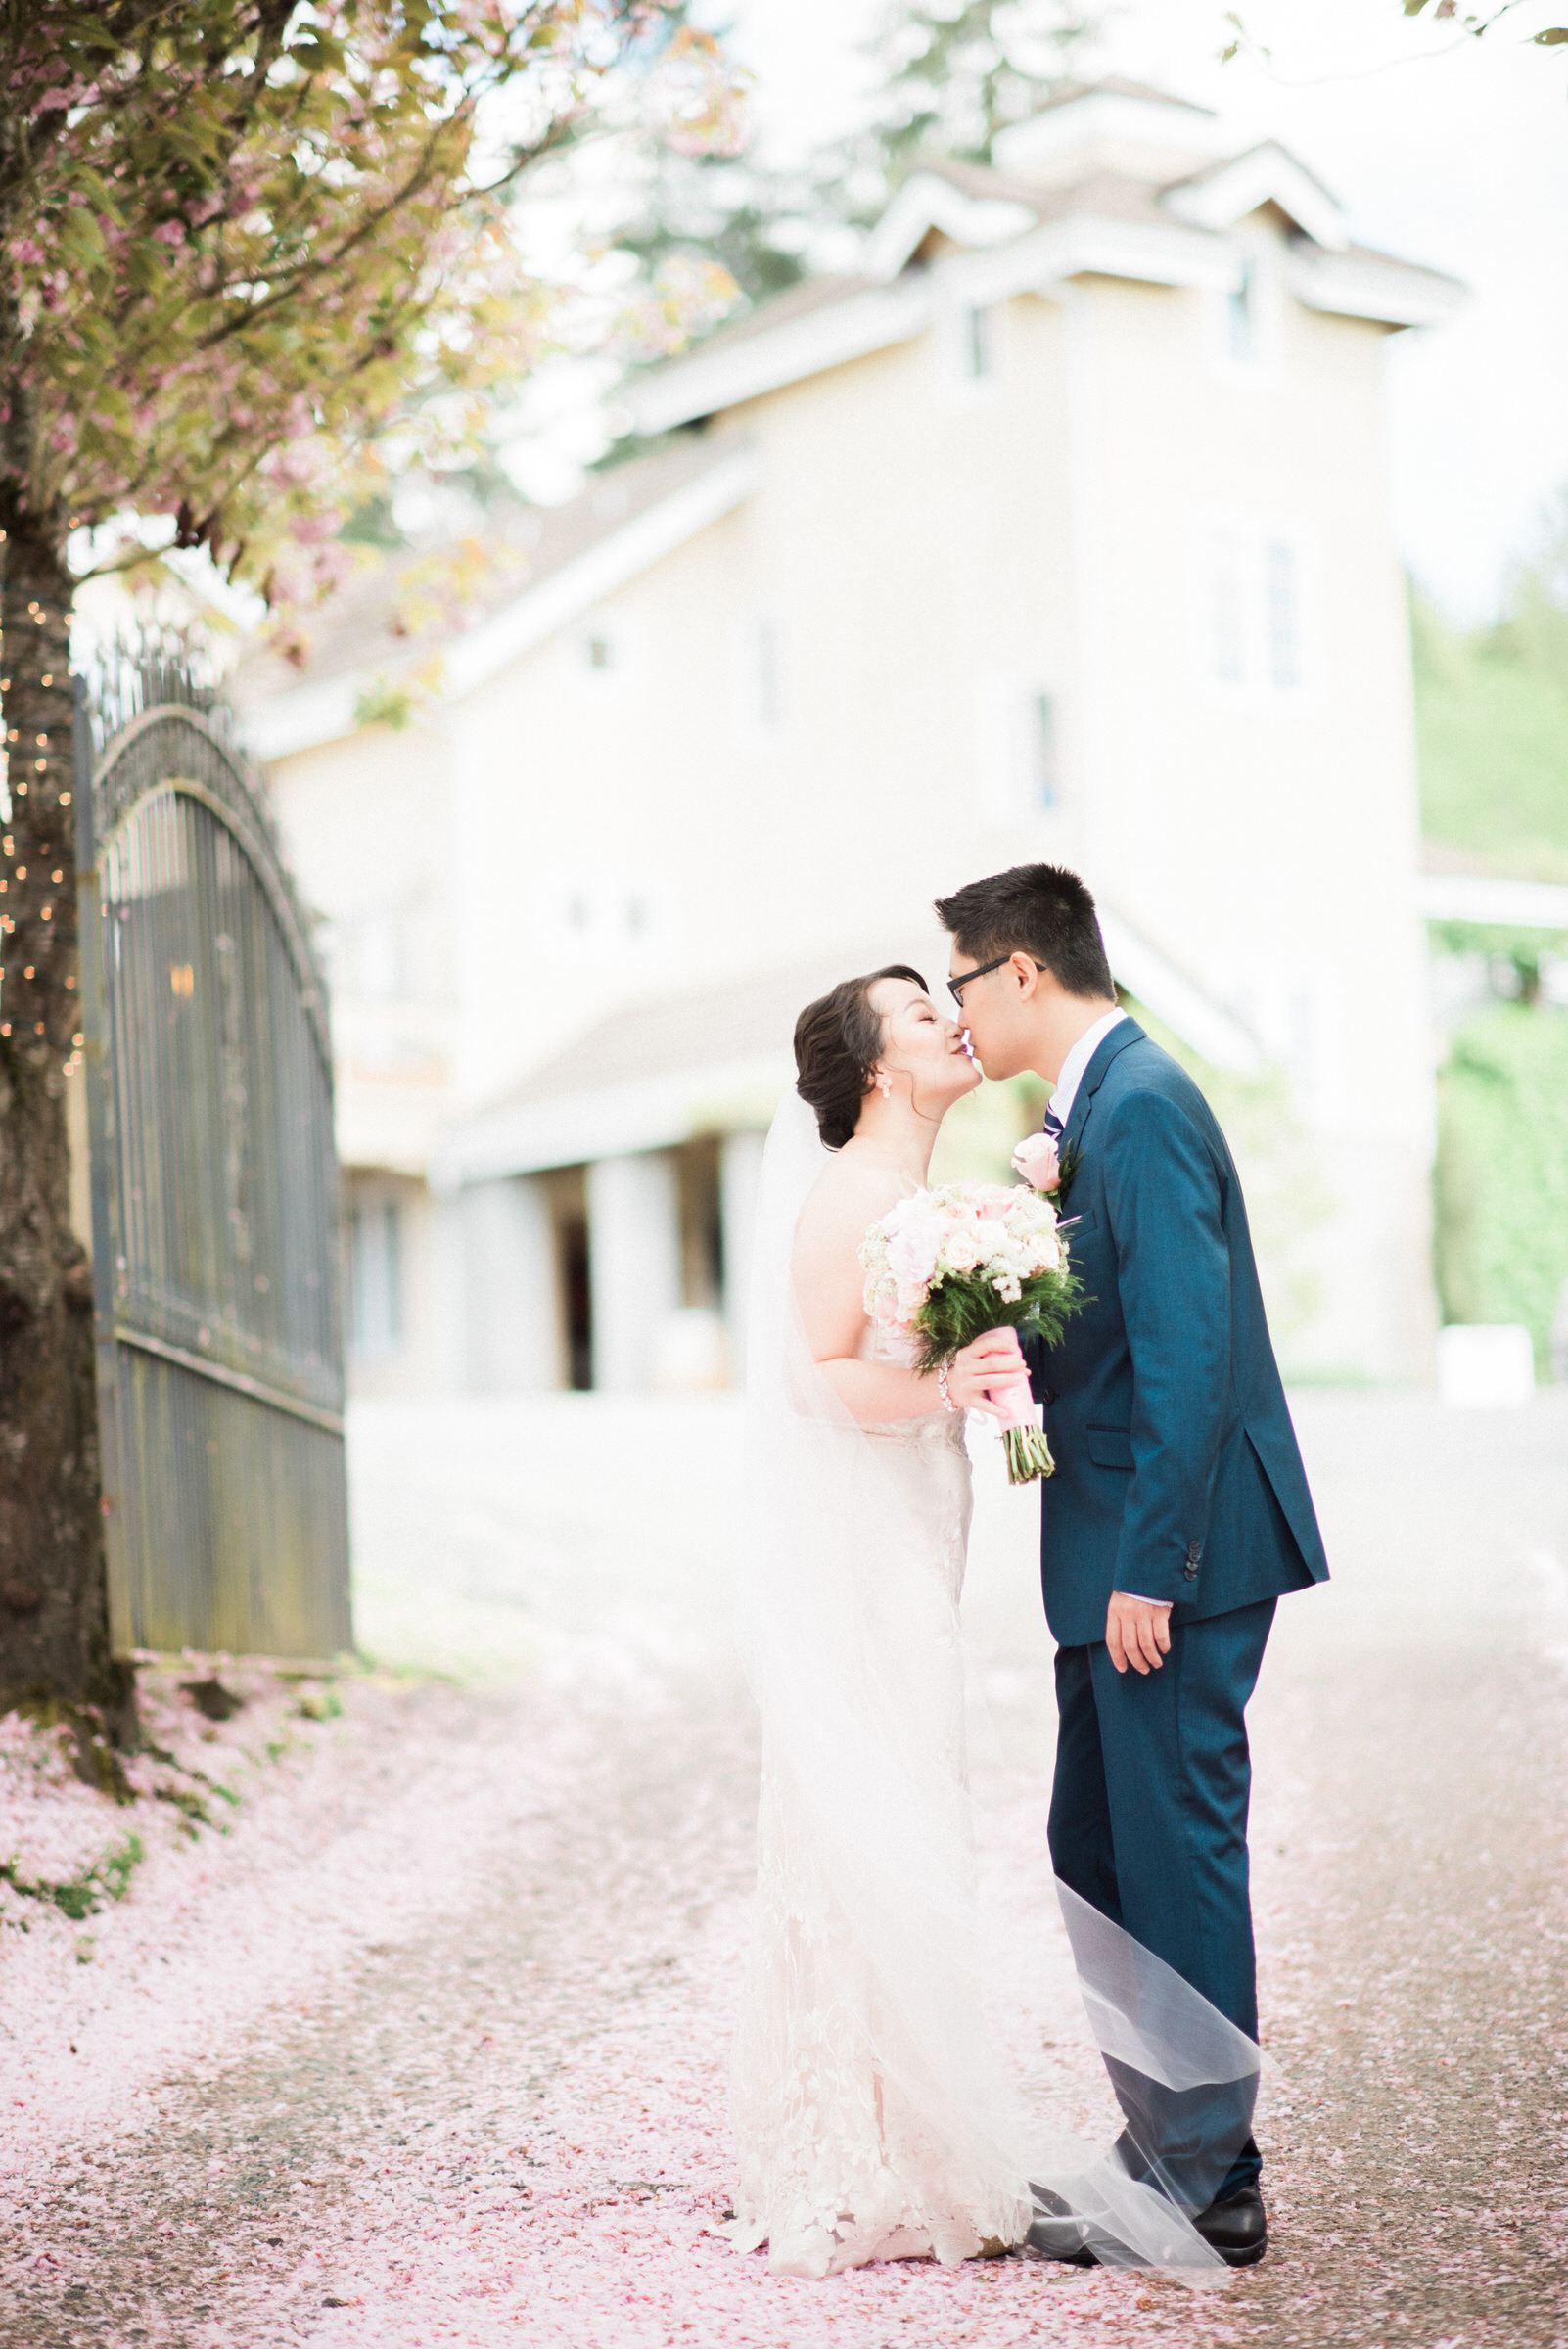 A Spring Wedding at DeLille Cellars: Angela and Sheng (28)